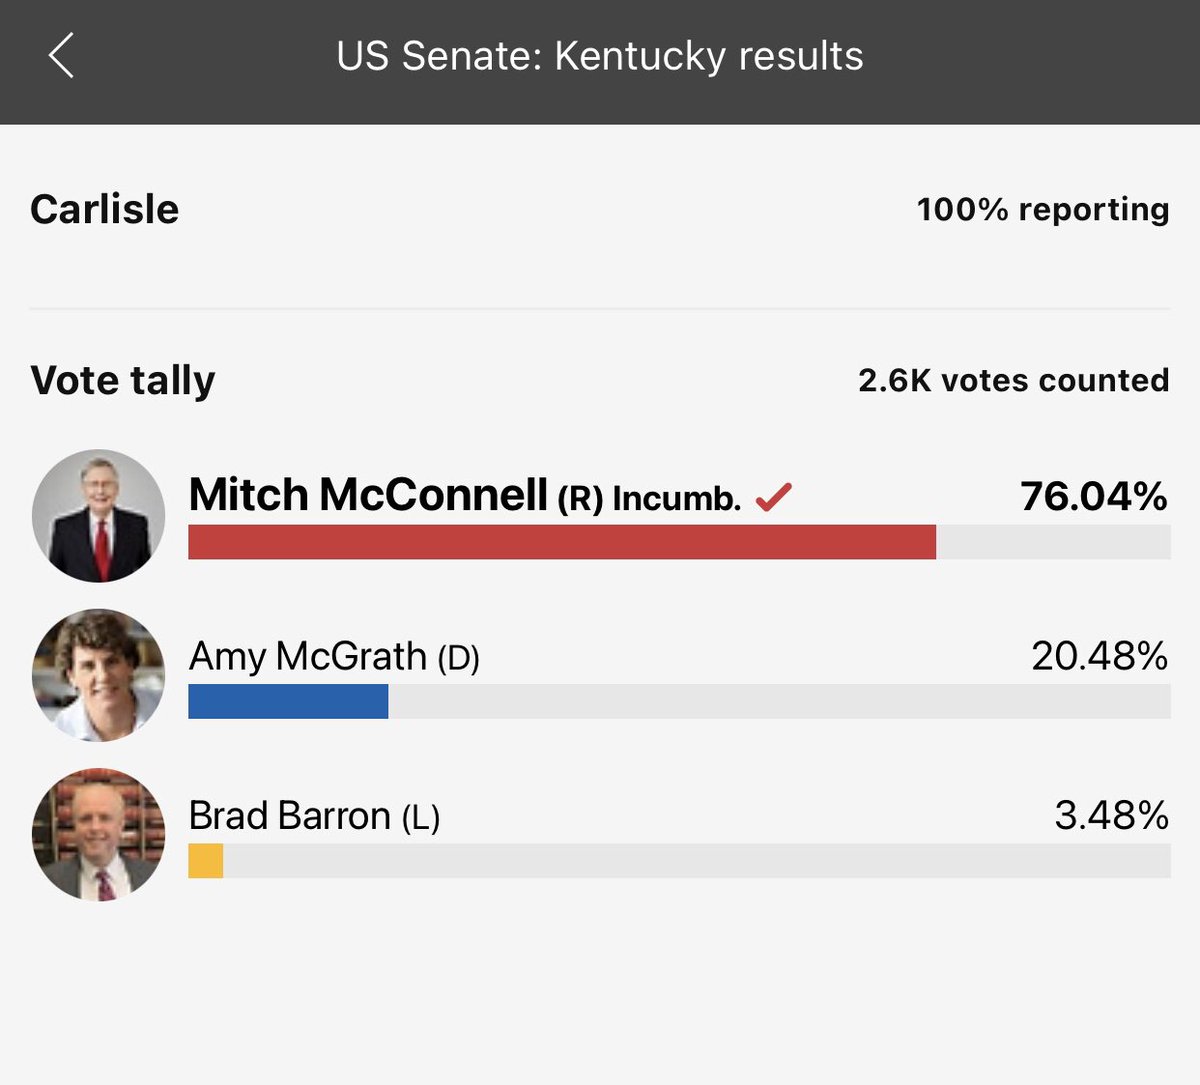 CARLISLE - Mitch won 76.04% of the 2,600 voters - roughly 1,977. There are 1,469 registered Republicans, 2,510 Democrats, & 154 Other